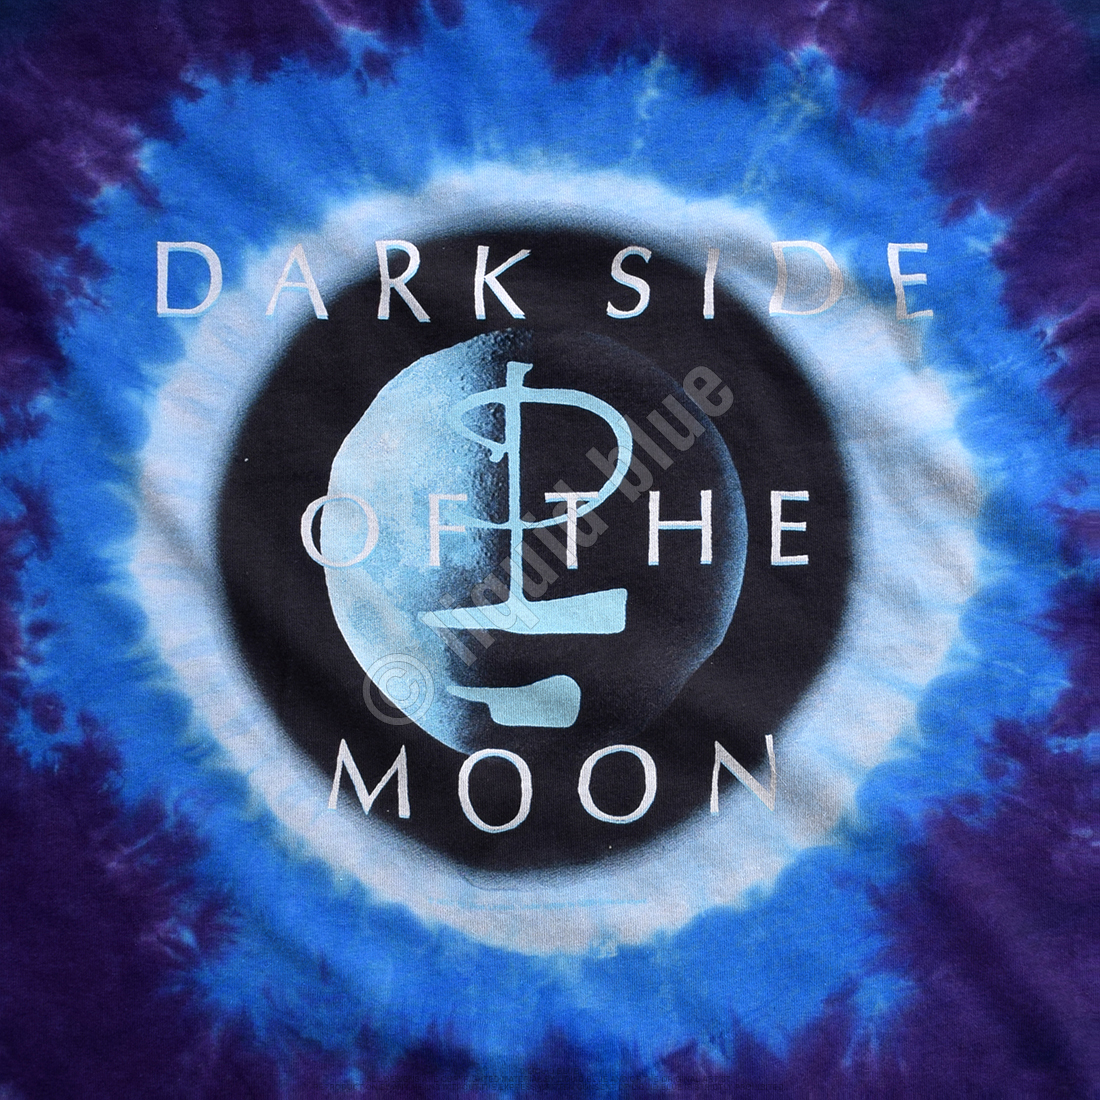 Pink Floyd Dark Side of the Moon Galaxy Tie Dye T Shirt | Have to Have ...